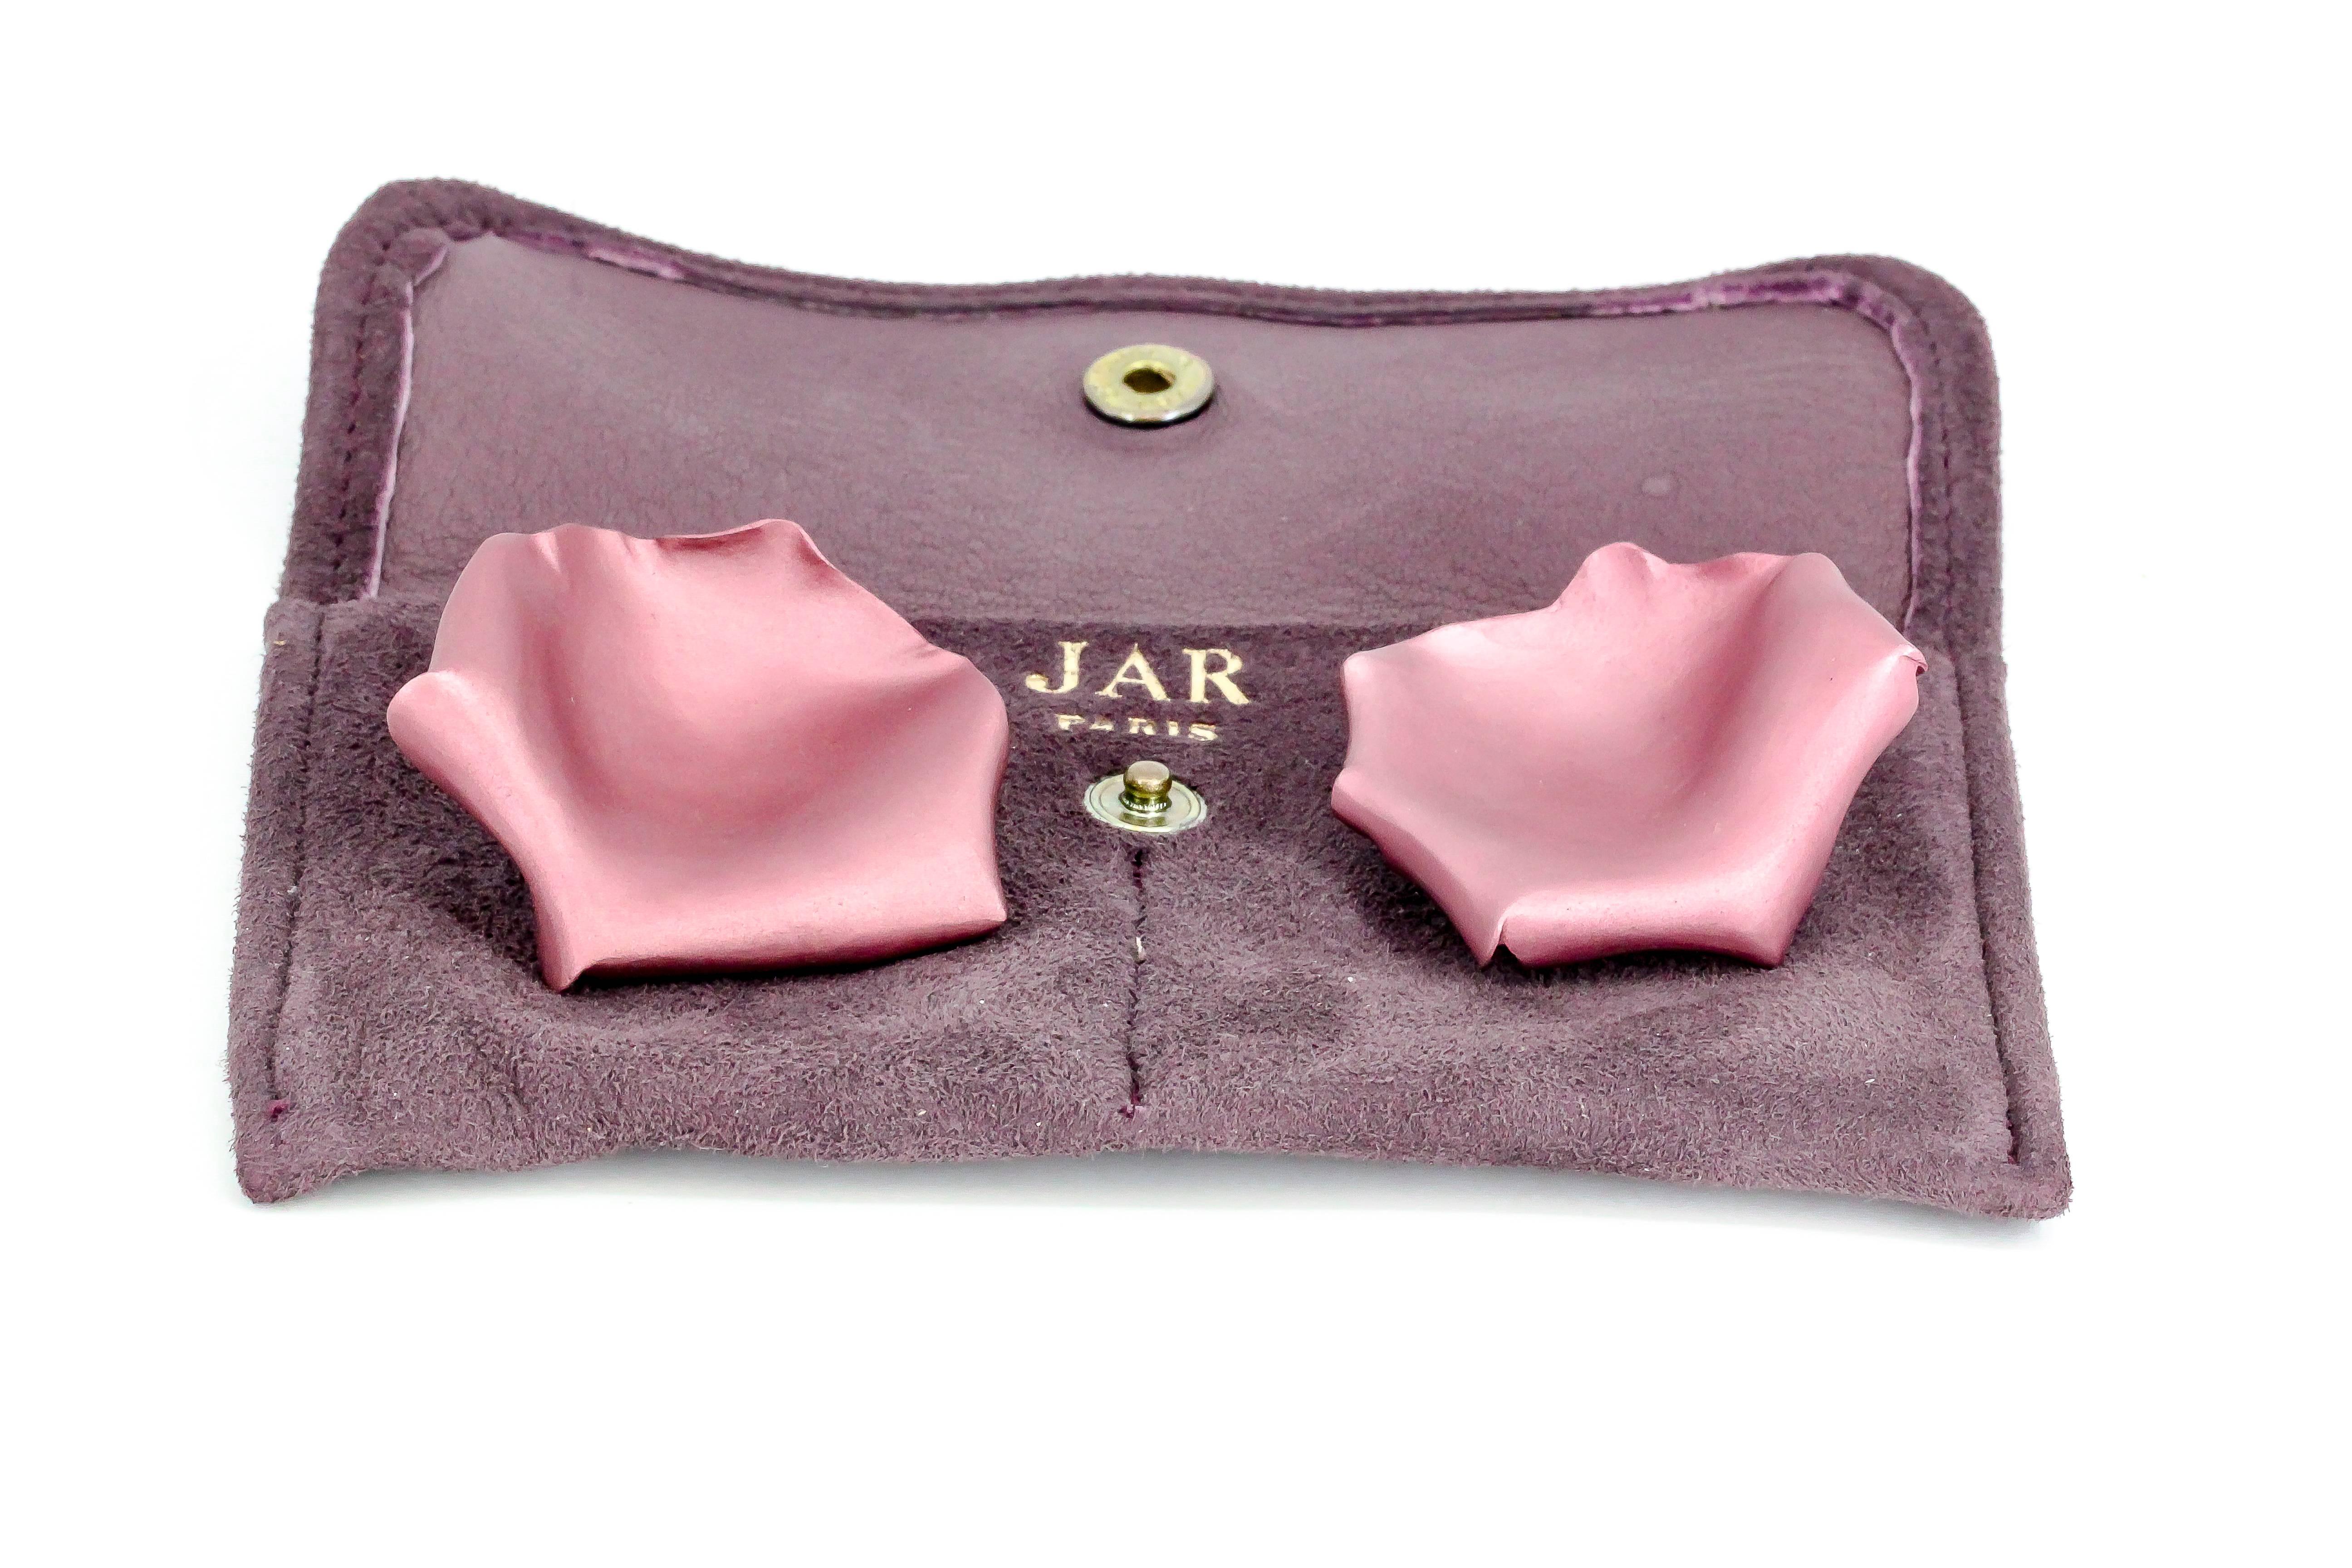 Rare and unusual brushed aluminum and 18K yellow gold clip-on earrings by JAR, Joel Arthur Rosenthal. They feature a purple matte finish and resemble rose petals, hence the name. 

Hallmarks: JAR, Paris, French 18k gold assay mark and maker's mark.